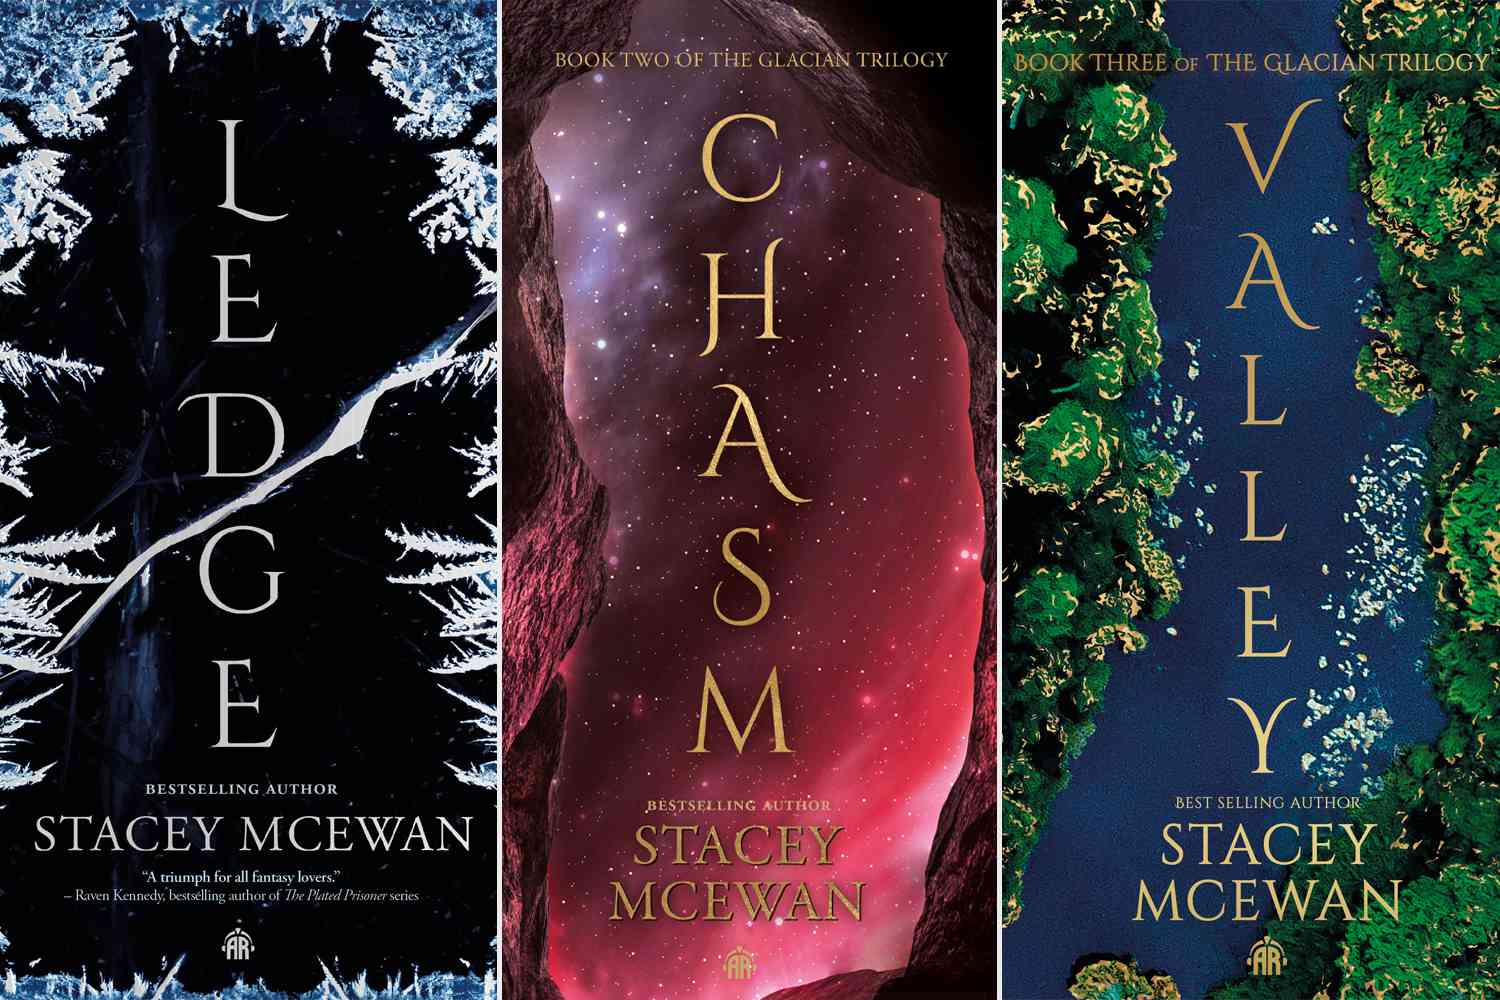 THE GLACIAN TRILOGY (Ledge; Chasm; Valley) by Stacey McEwan